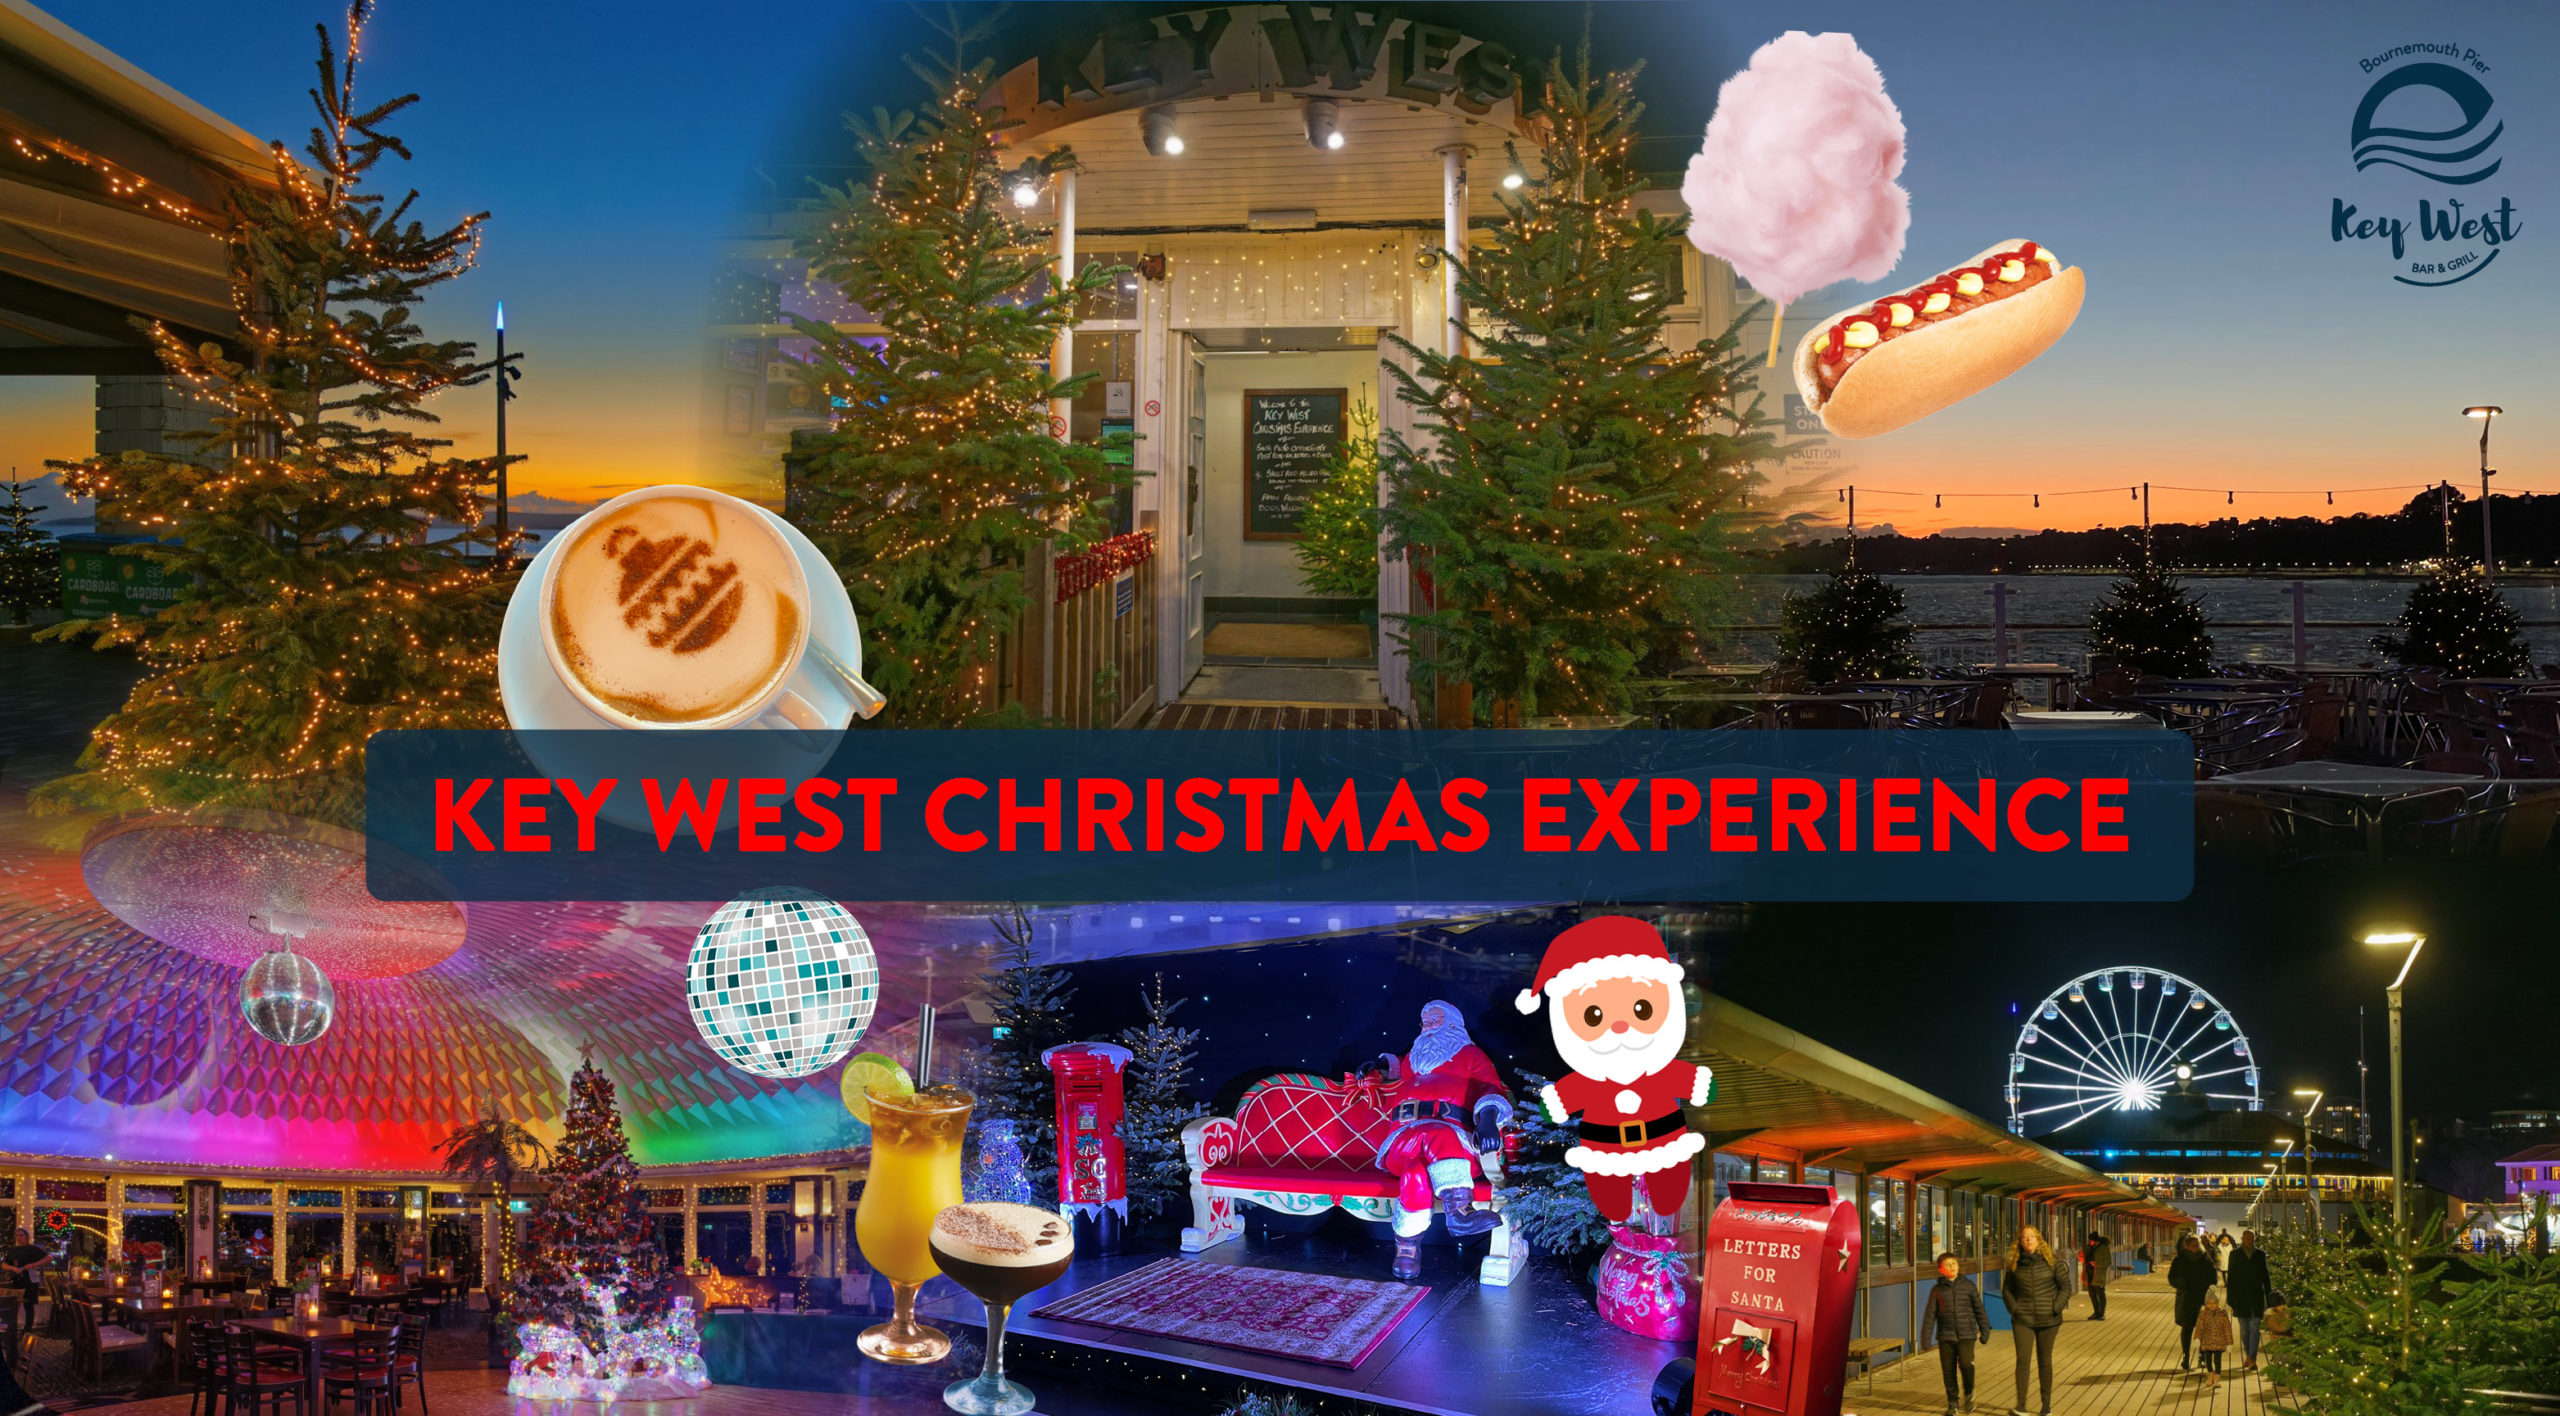 Visit Bournemouth Pier for an eventful fun packed family Christmas experience! 